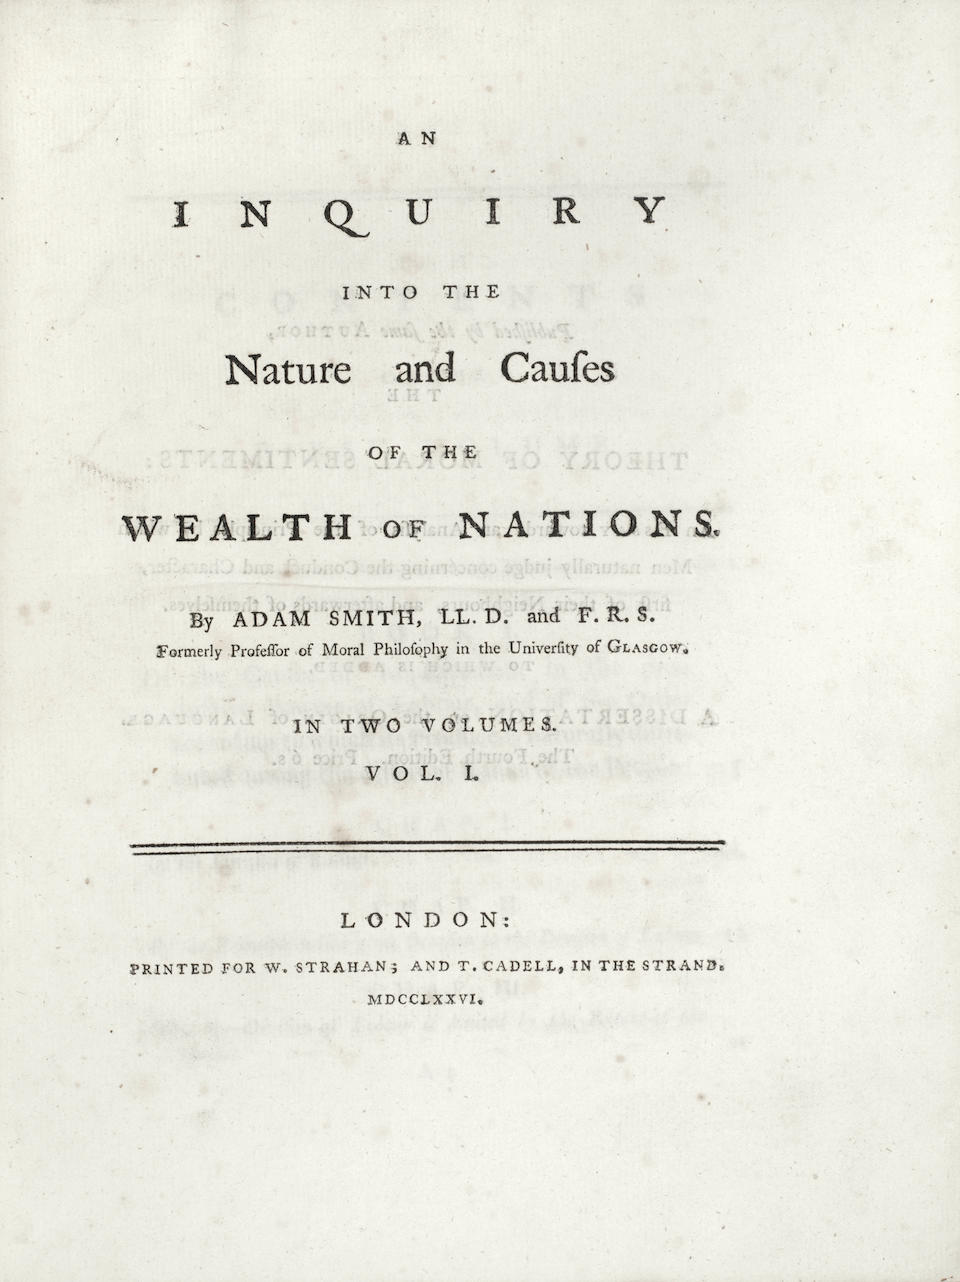 Bonhams : SMITH (ADAM) An Inquiry into the Nature and of the Wealth of Nations, vol., FIRST EDITION, W. Strahan, and T. Cadell,